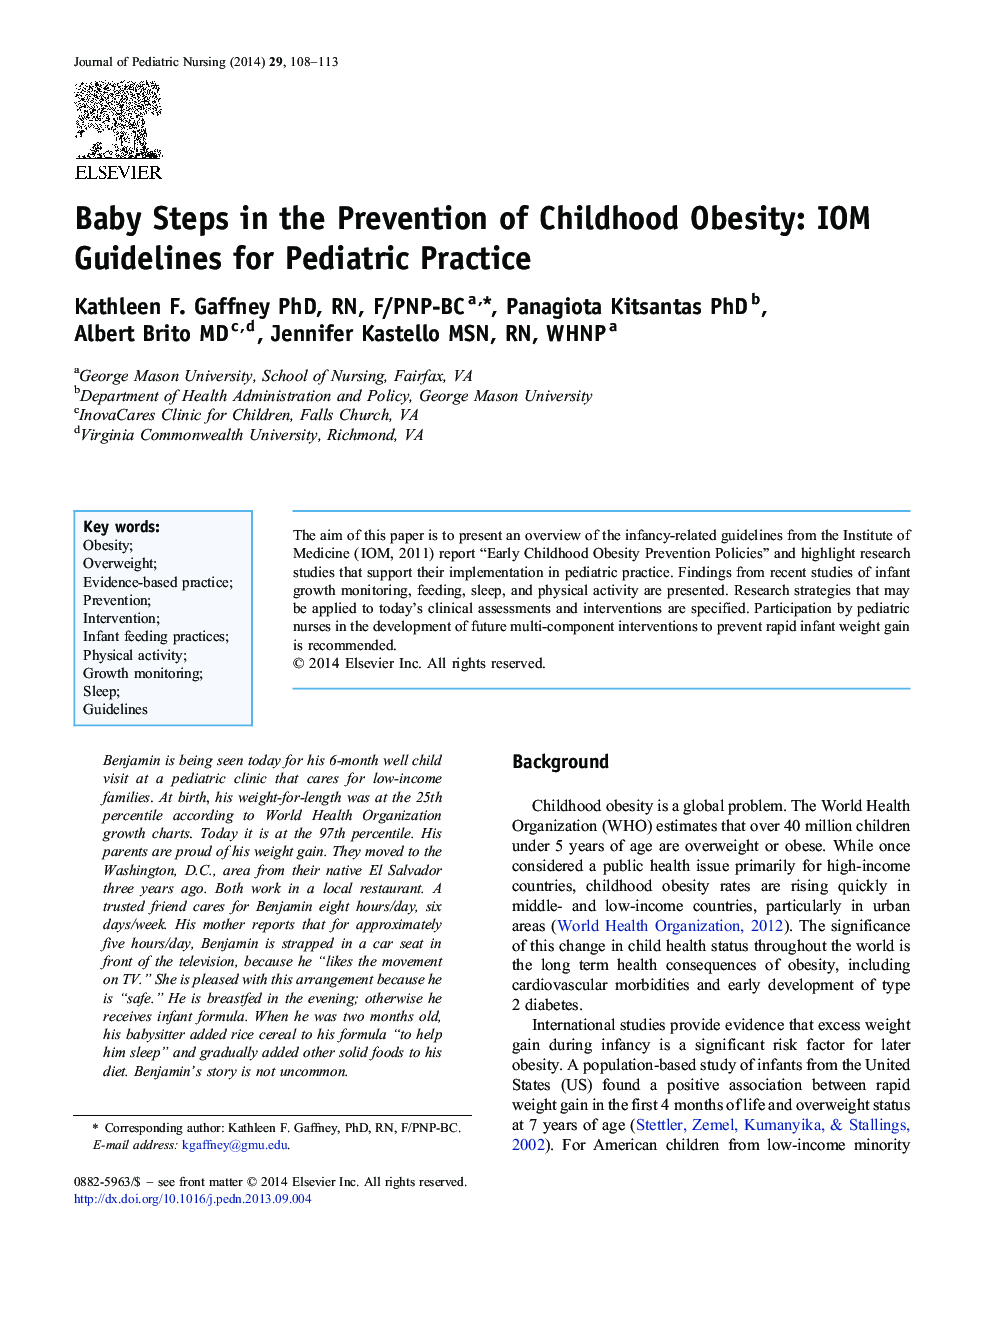 Baby Steps in the Prevention of Childhood Obesity: IOM Guidelines for Pediatric Practice